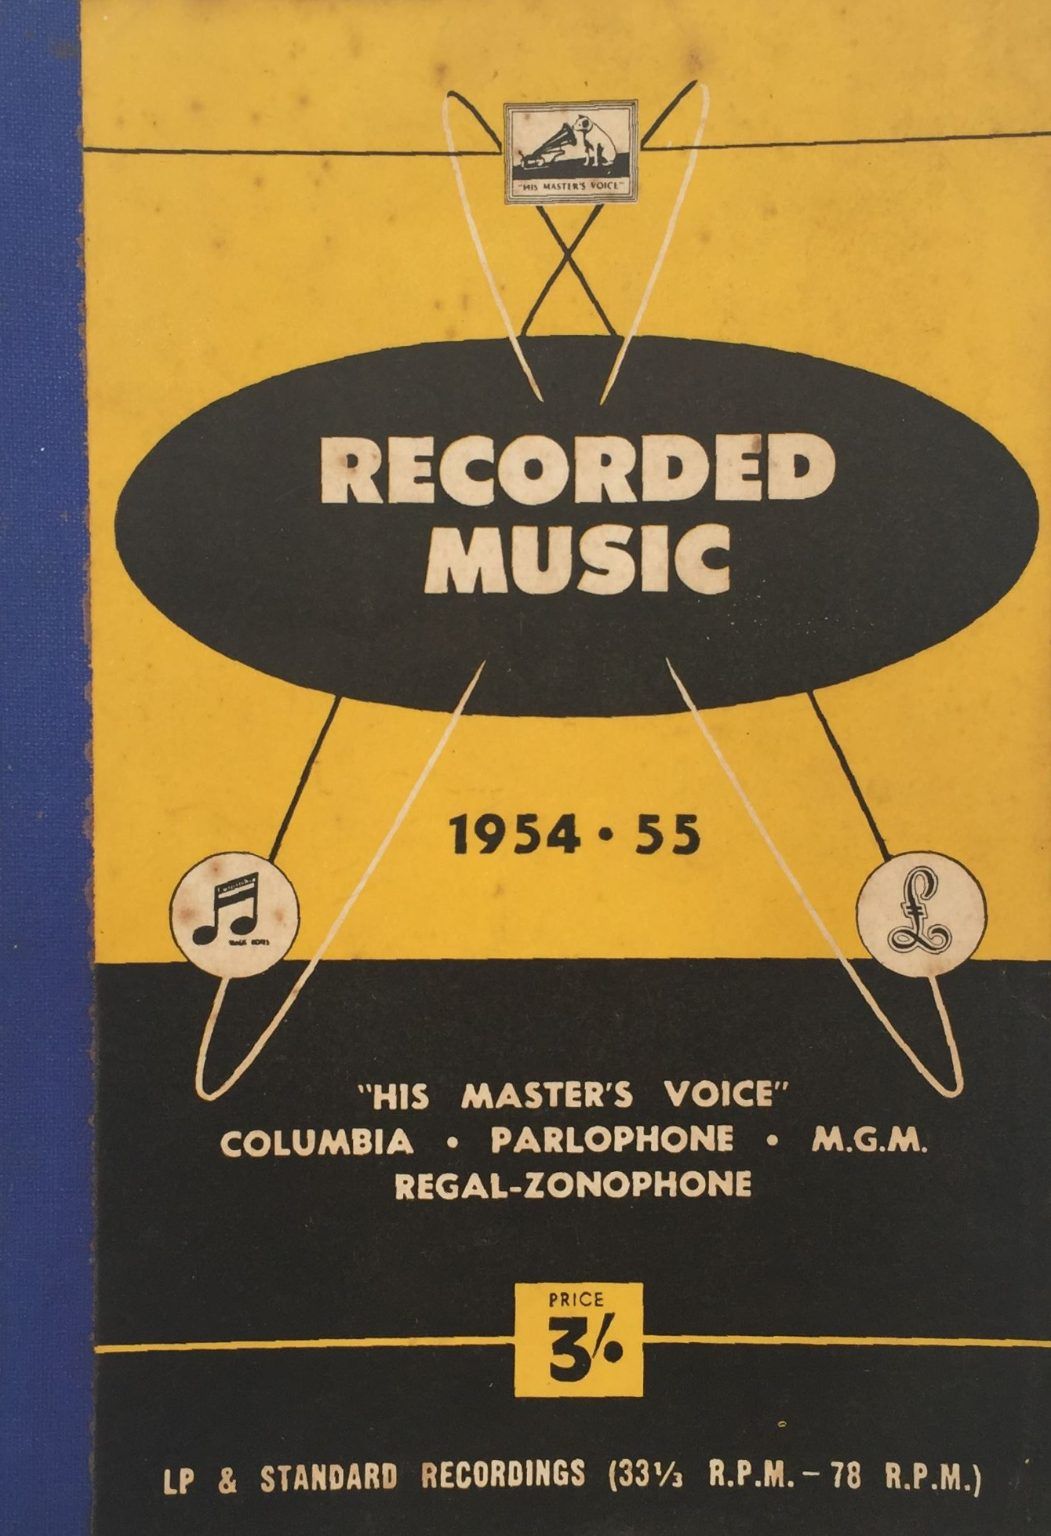 RECORDED MUSIC 1954 - 55: Catalogue of Long Playing Records